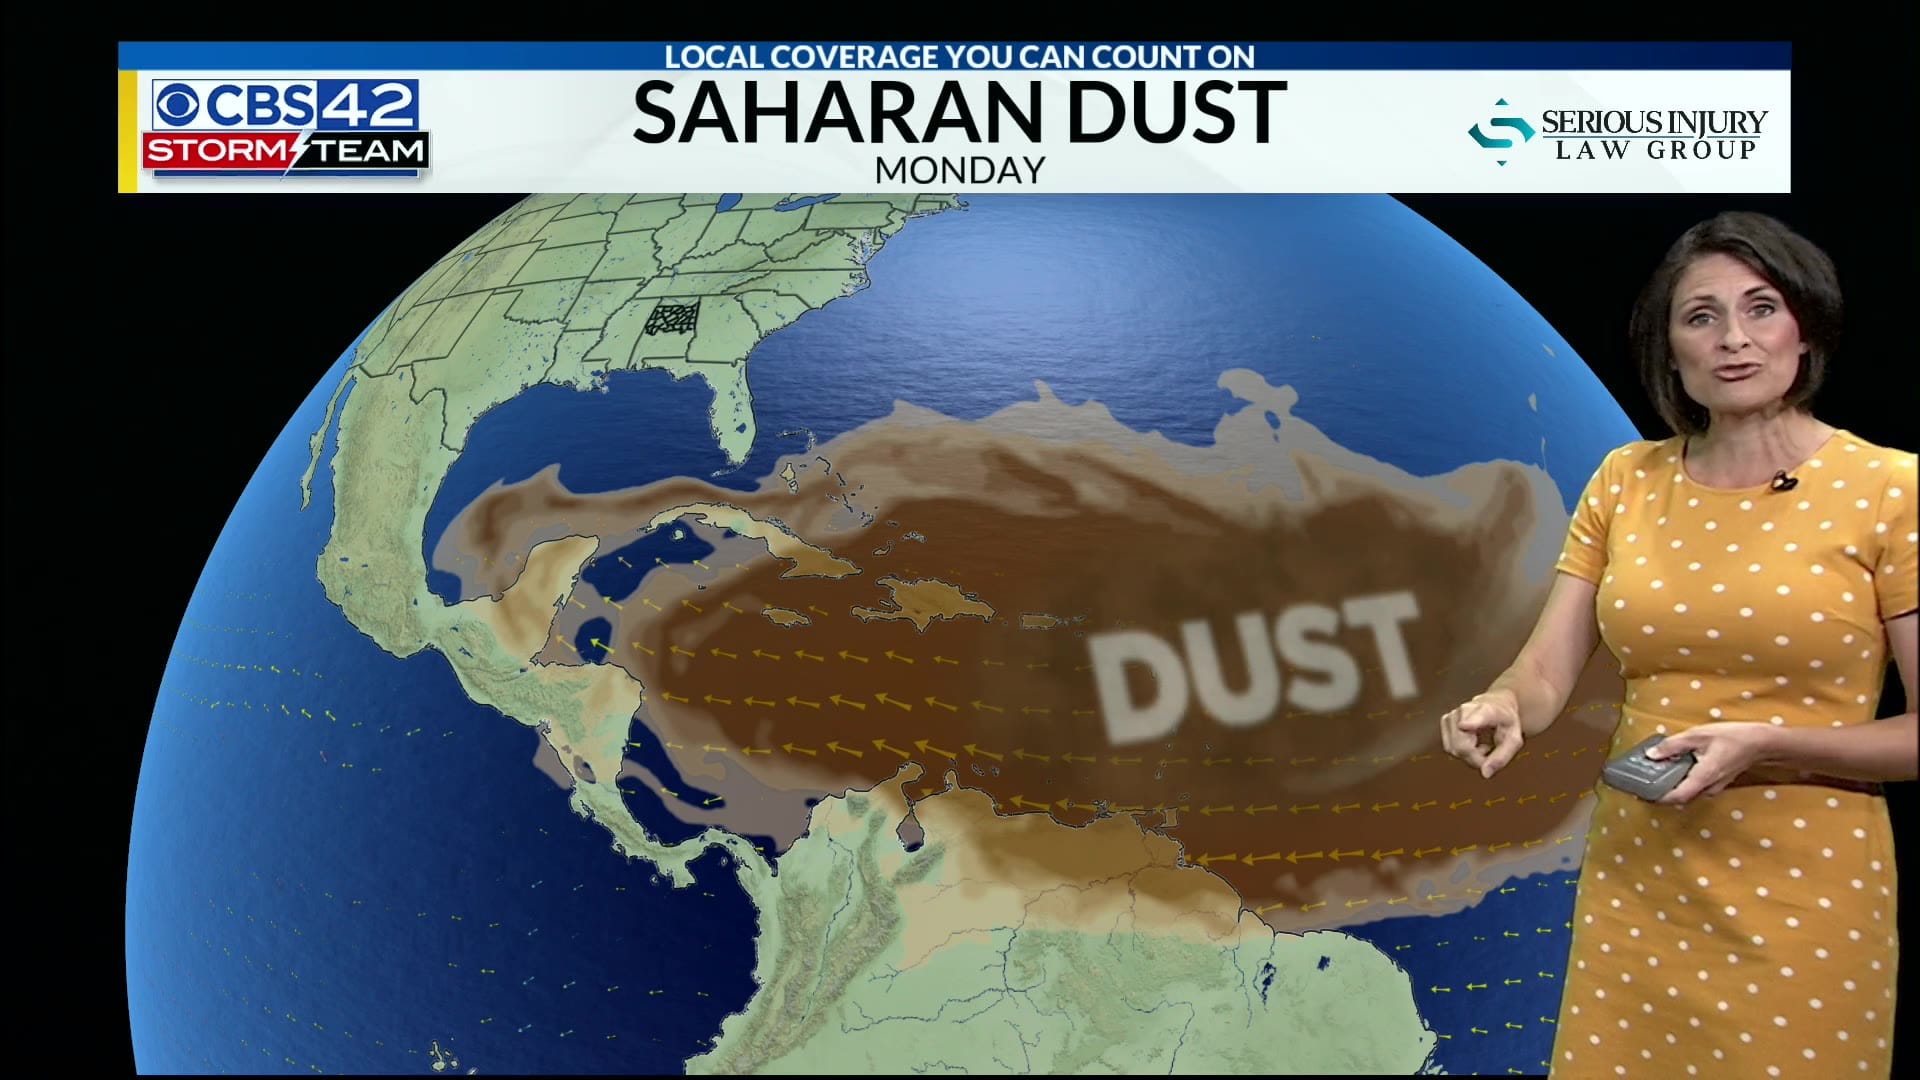 Sahara Dust 1 What is Saharan Dust? When is it coming to Birmingham? Answers from CBS 42’s Ashley Gann